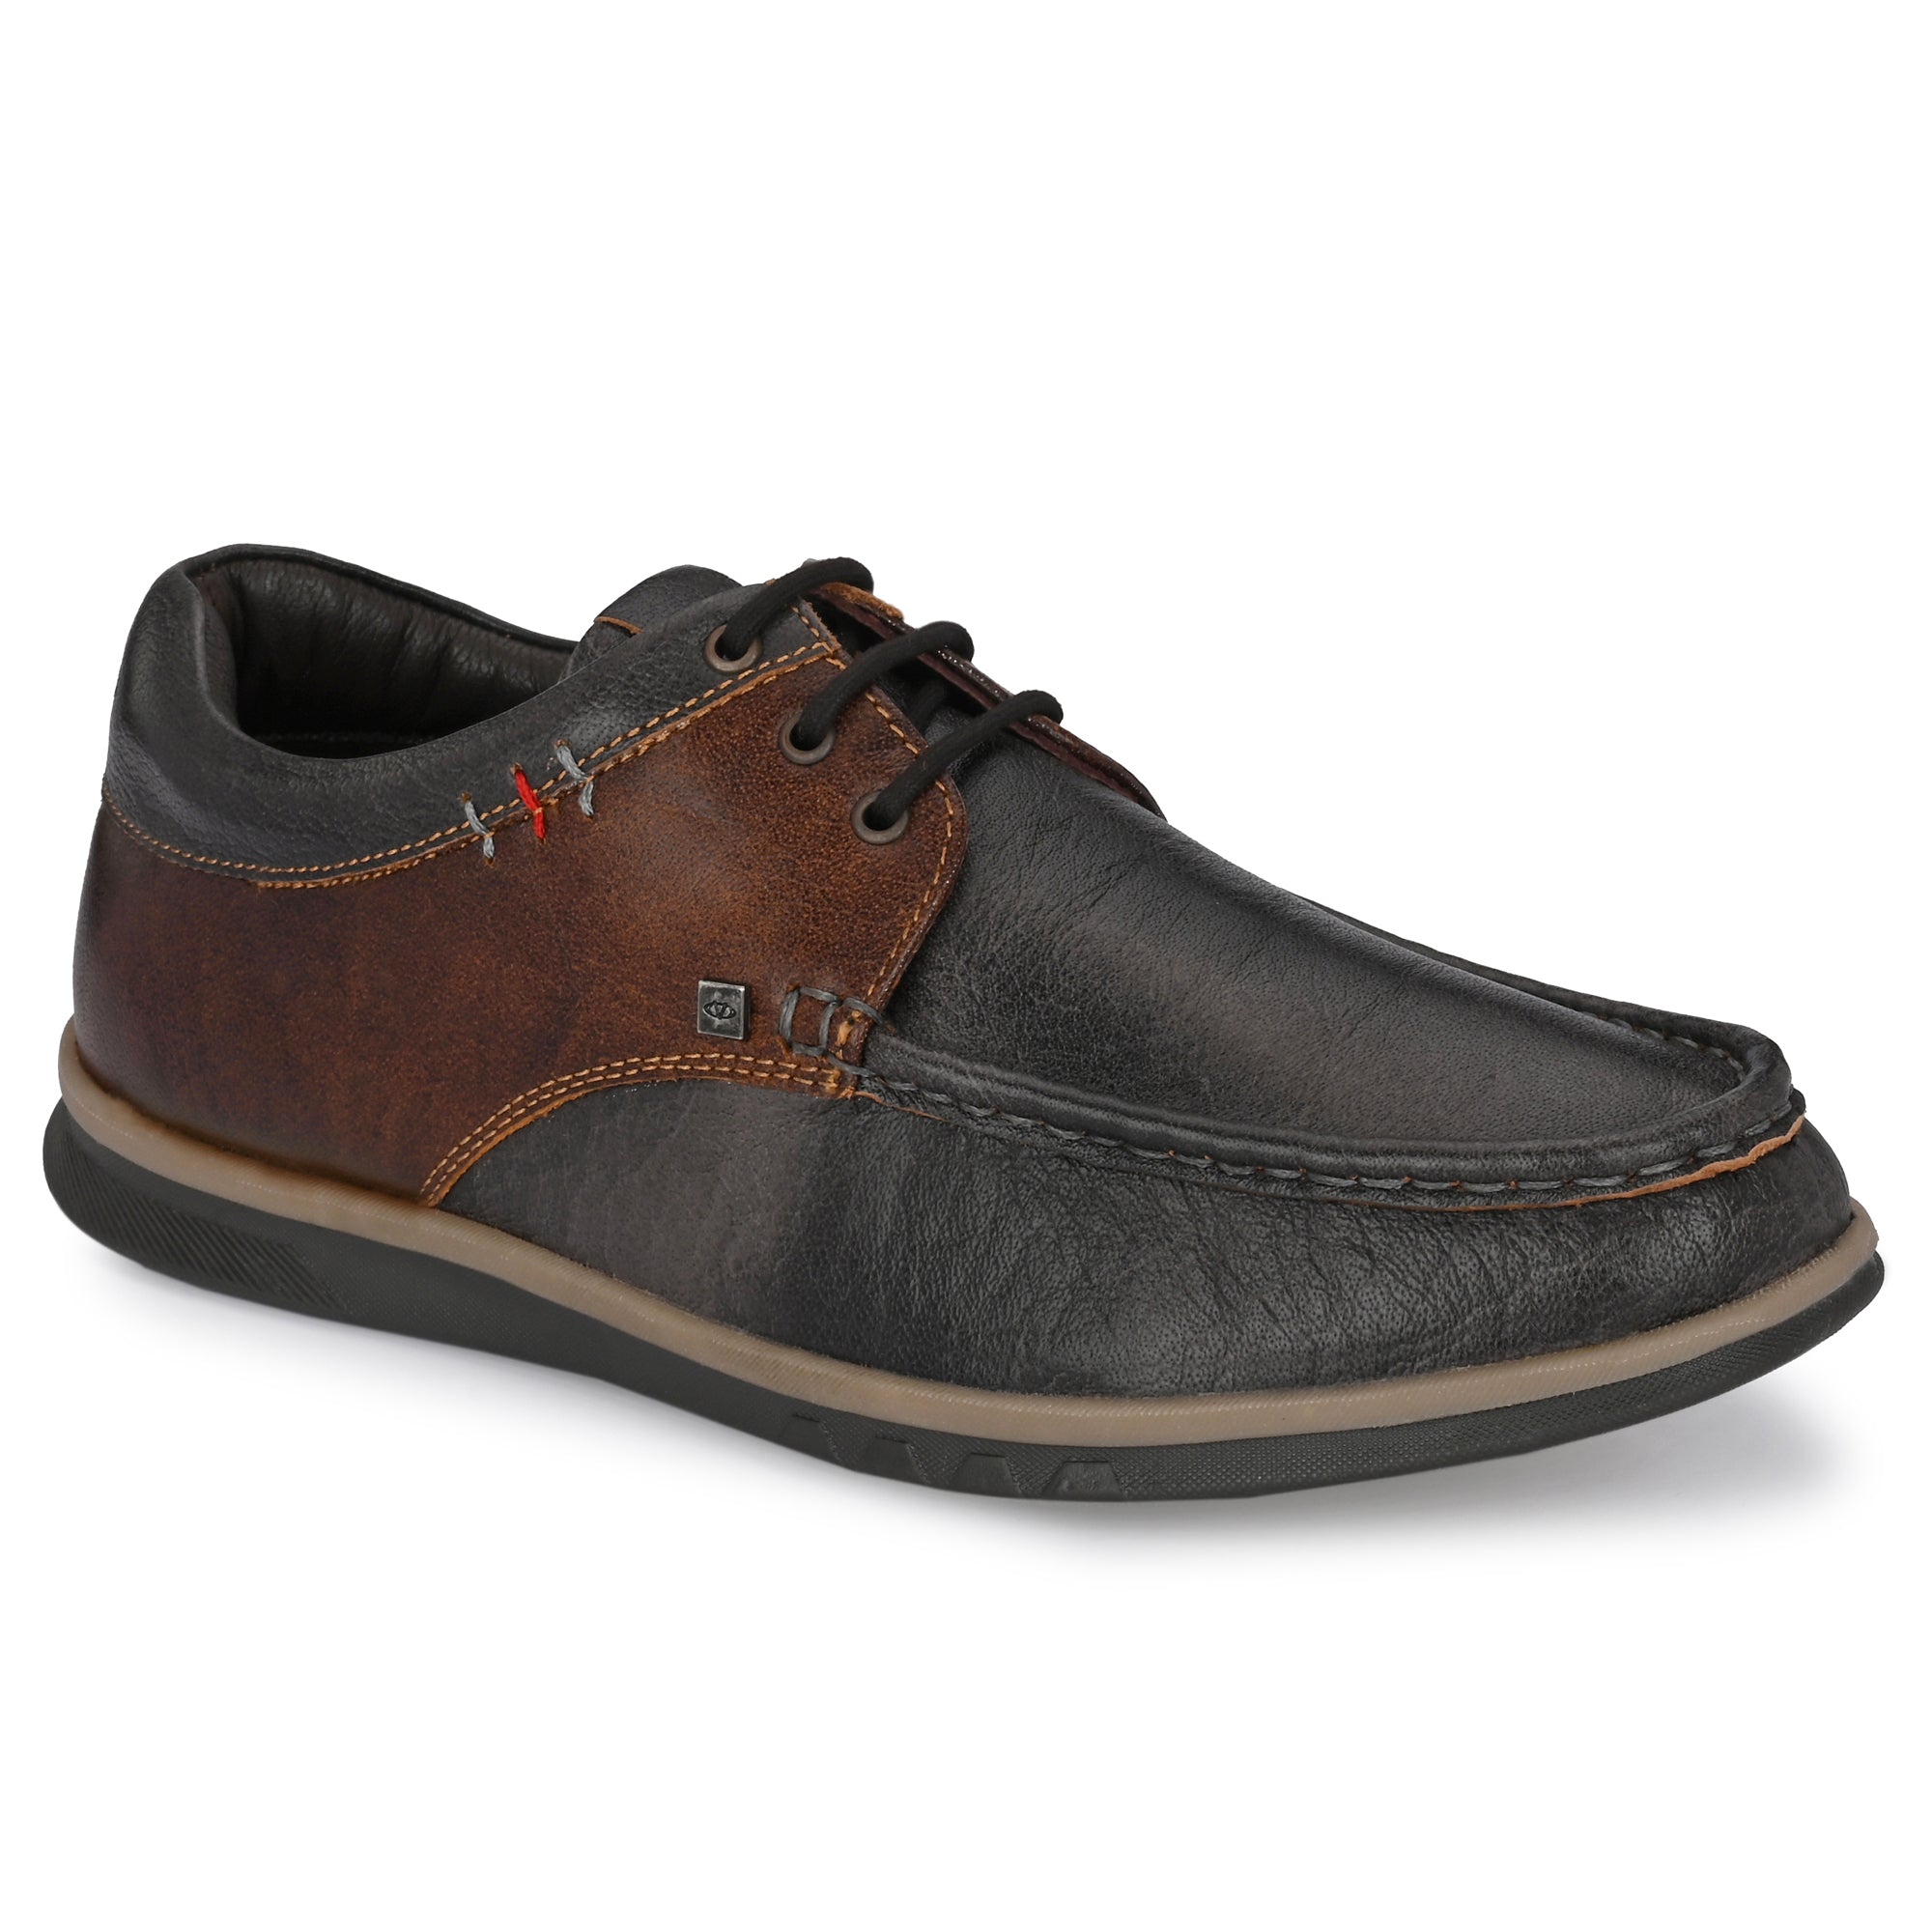 FASCINATE-55 MEN LEATHER GREY/TAN CASUAL LACE UP DERBY